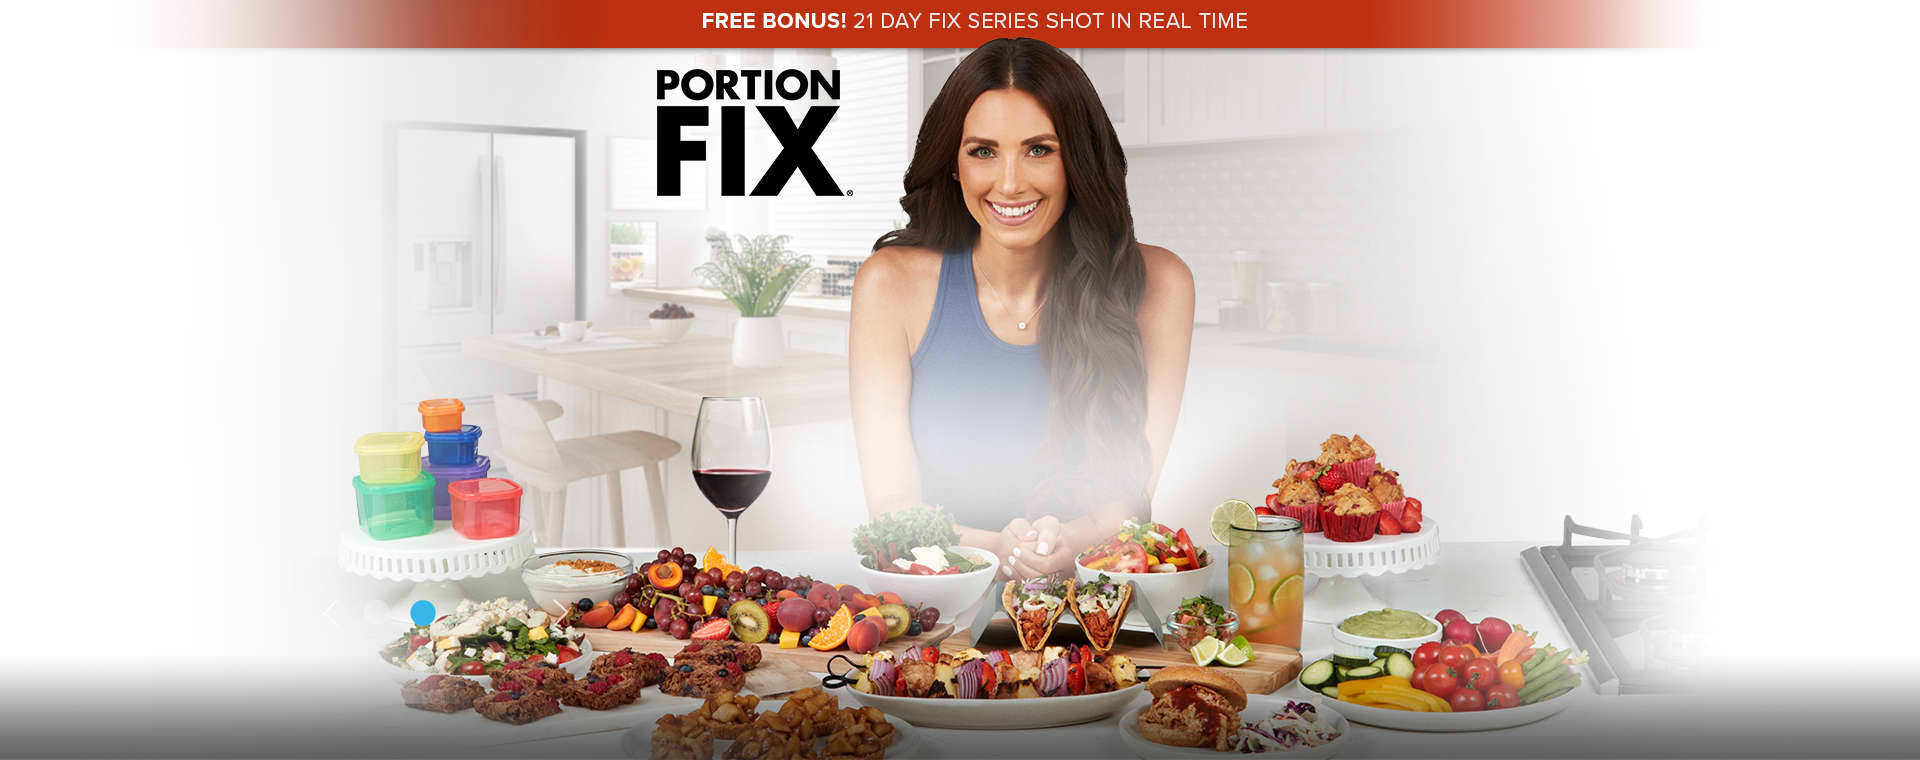 TEAM BEACHBODY // portion fix container system 